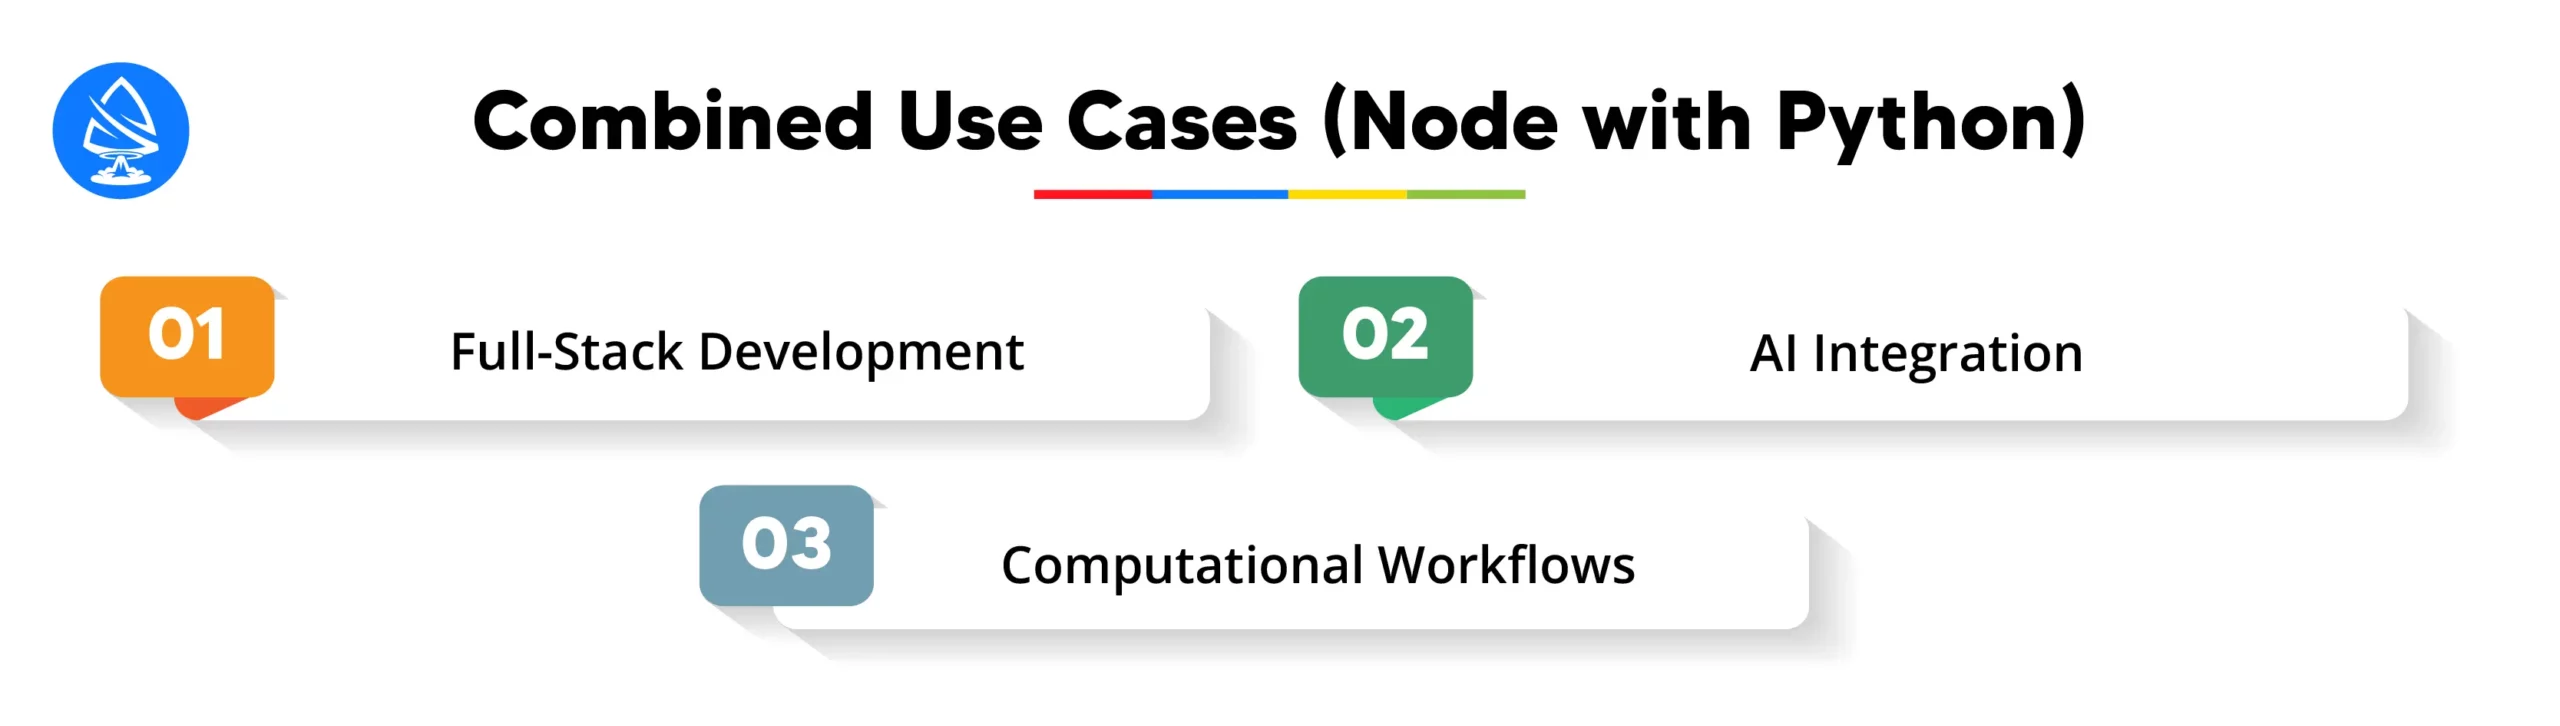 Combined Use Cases (Node with Python): Harnessing the Power of Both 